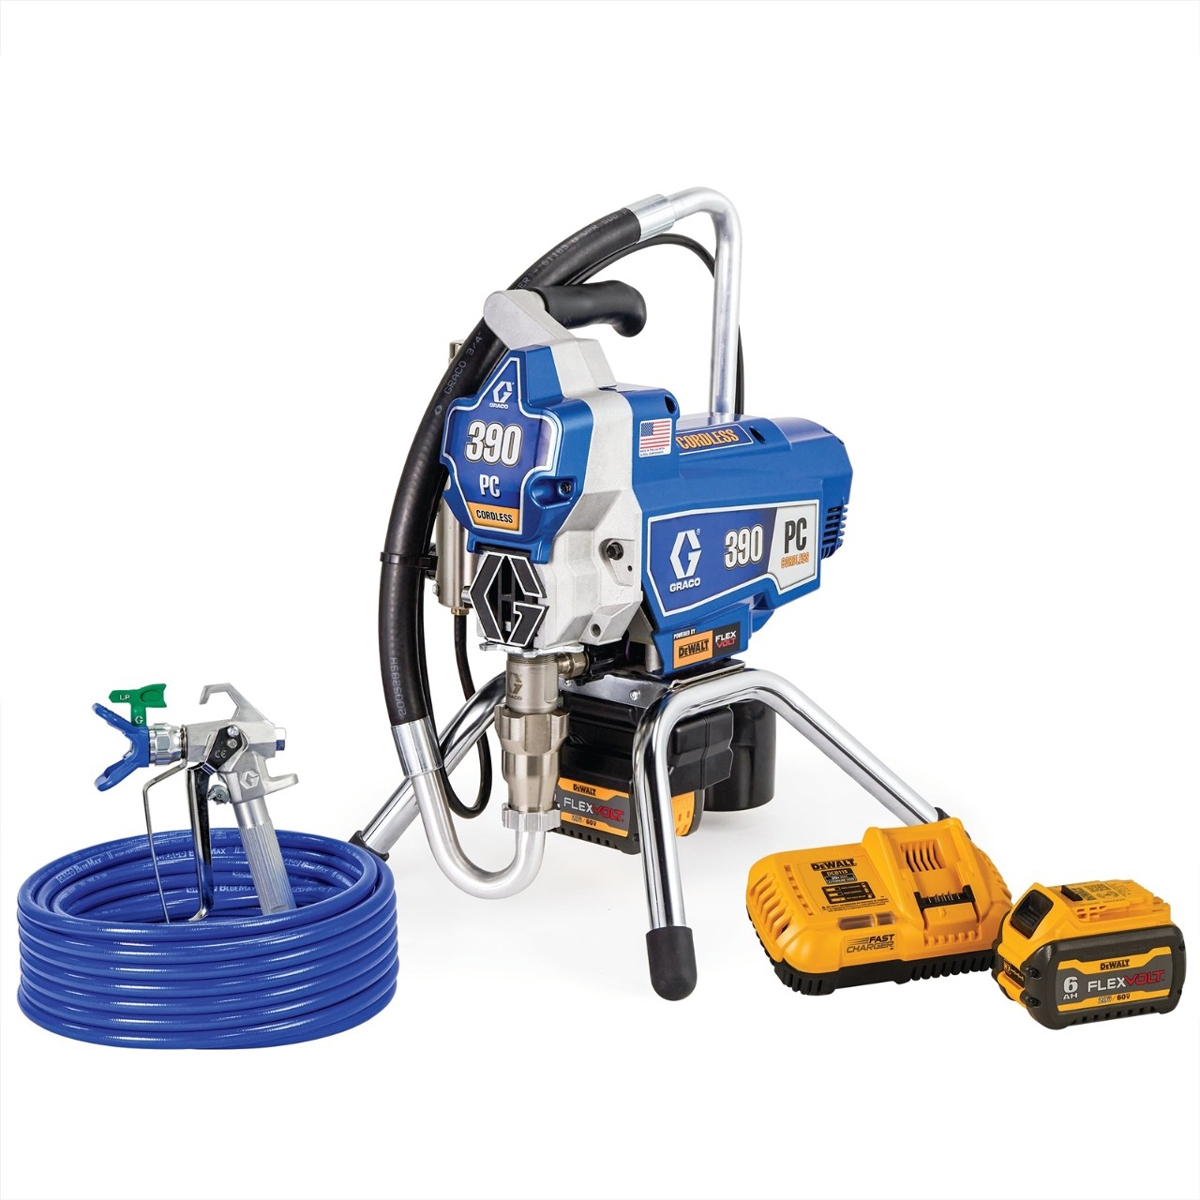 Graco 390 PC Stand Cordless Airless Sprayer